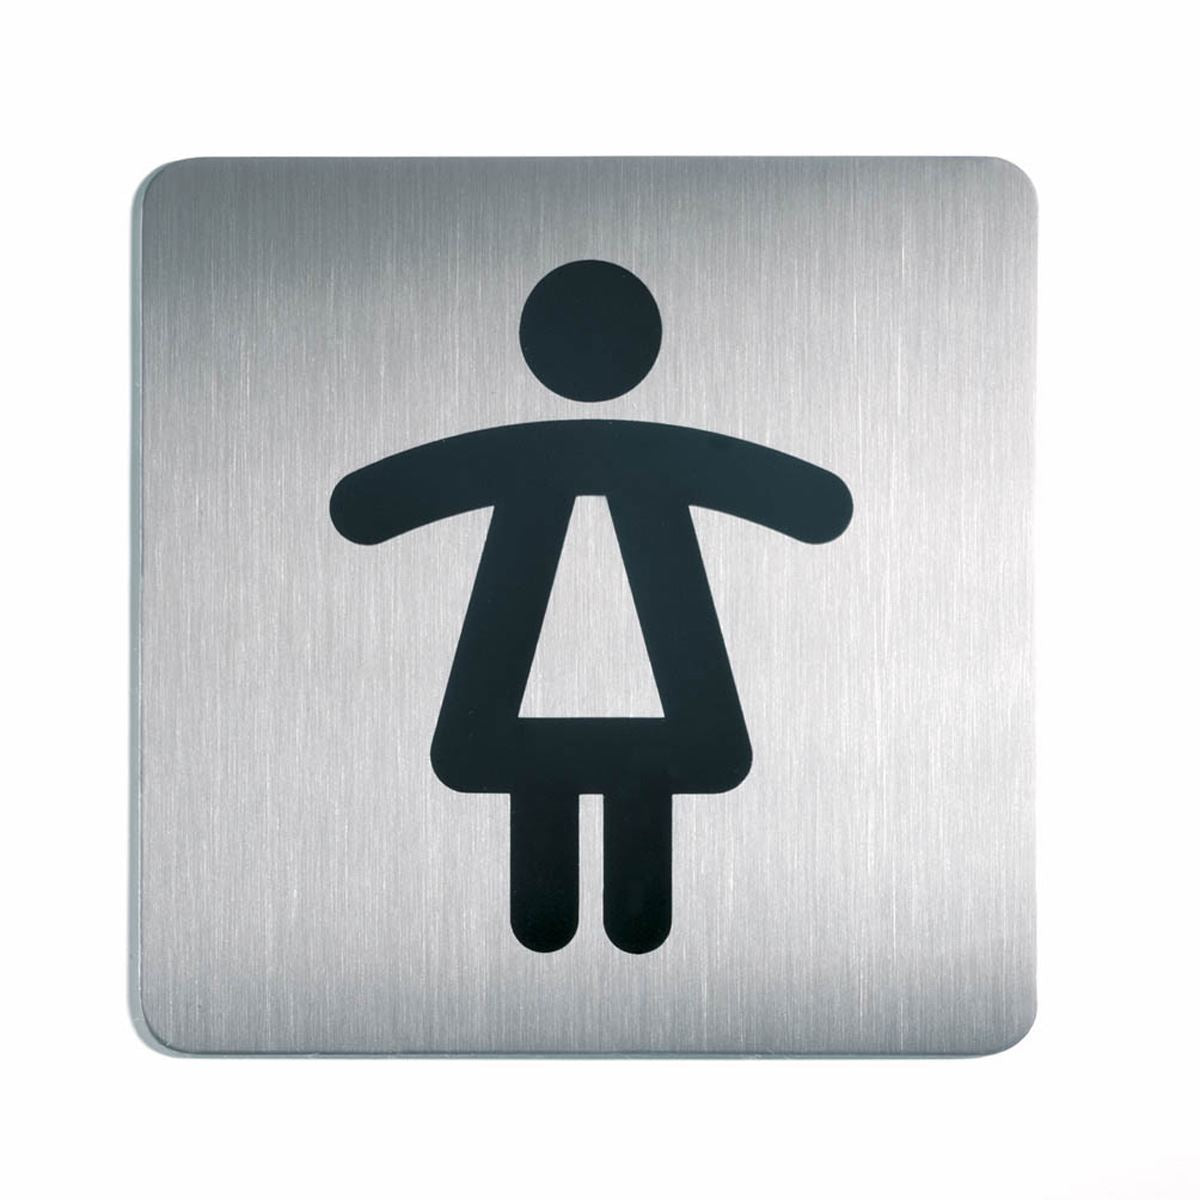 Durable Adhesive Women's WC Symbol Square Bathroom Toilet Sign | Stainless Steel